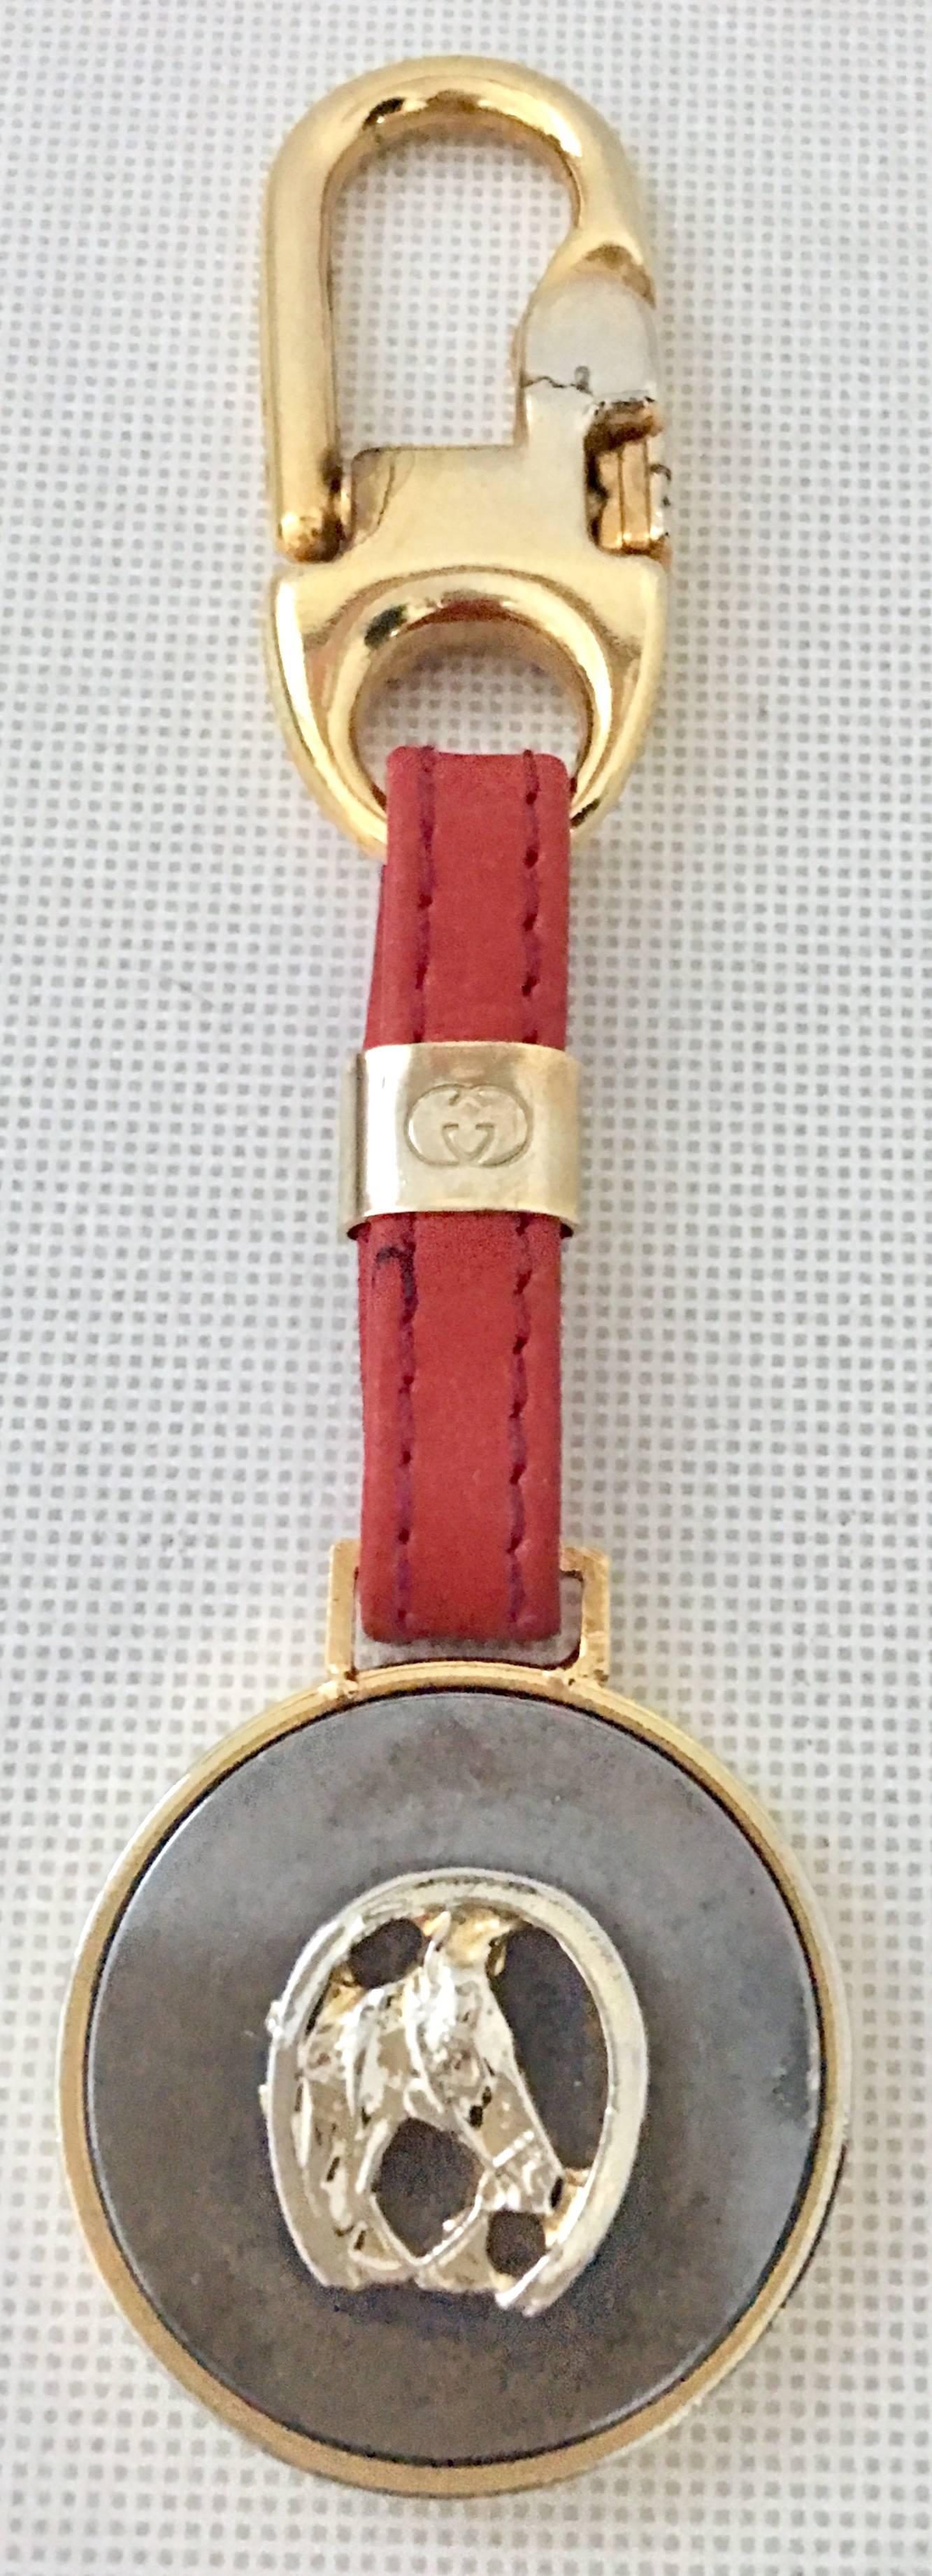 `Vintage Gucci Gold Plate & Red Leather Equestrian "Good Luck" Key Chain. This like new Gucci Italy gold plate and red leather key chain features a lovely weighted round disc of gold with a pewter color insert and raised horse shoe and